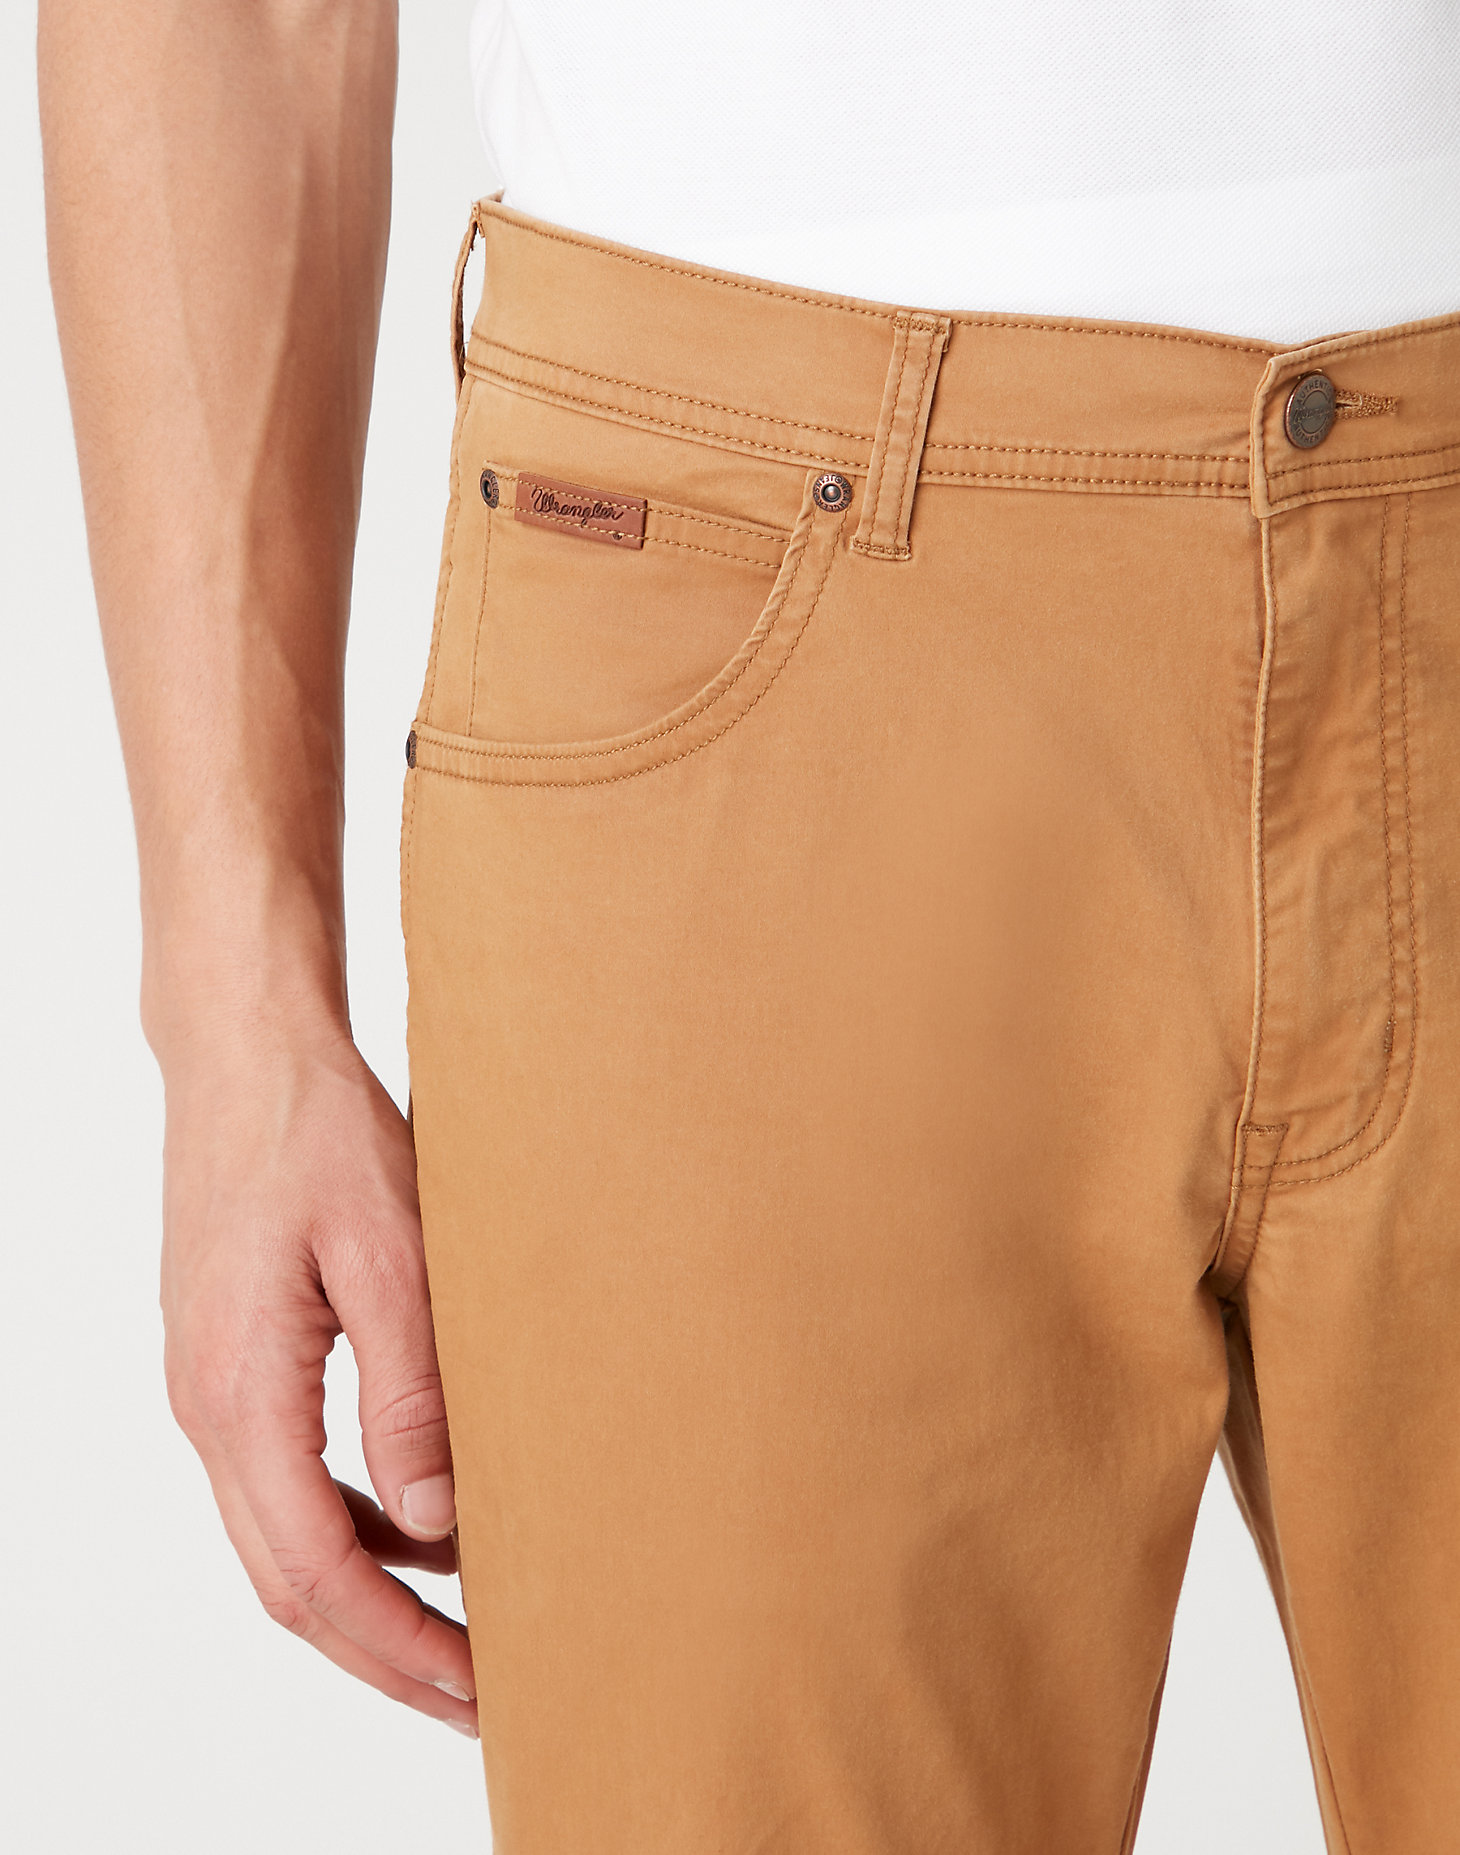 Texas Slim Trousers in Biscuit alternative view 5